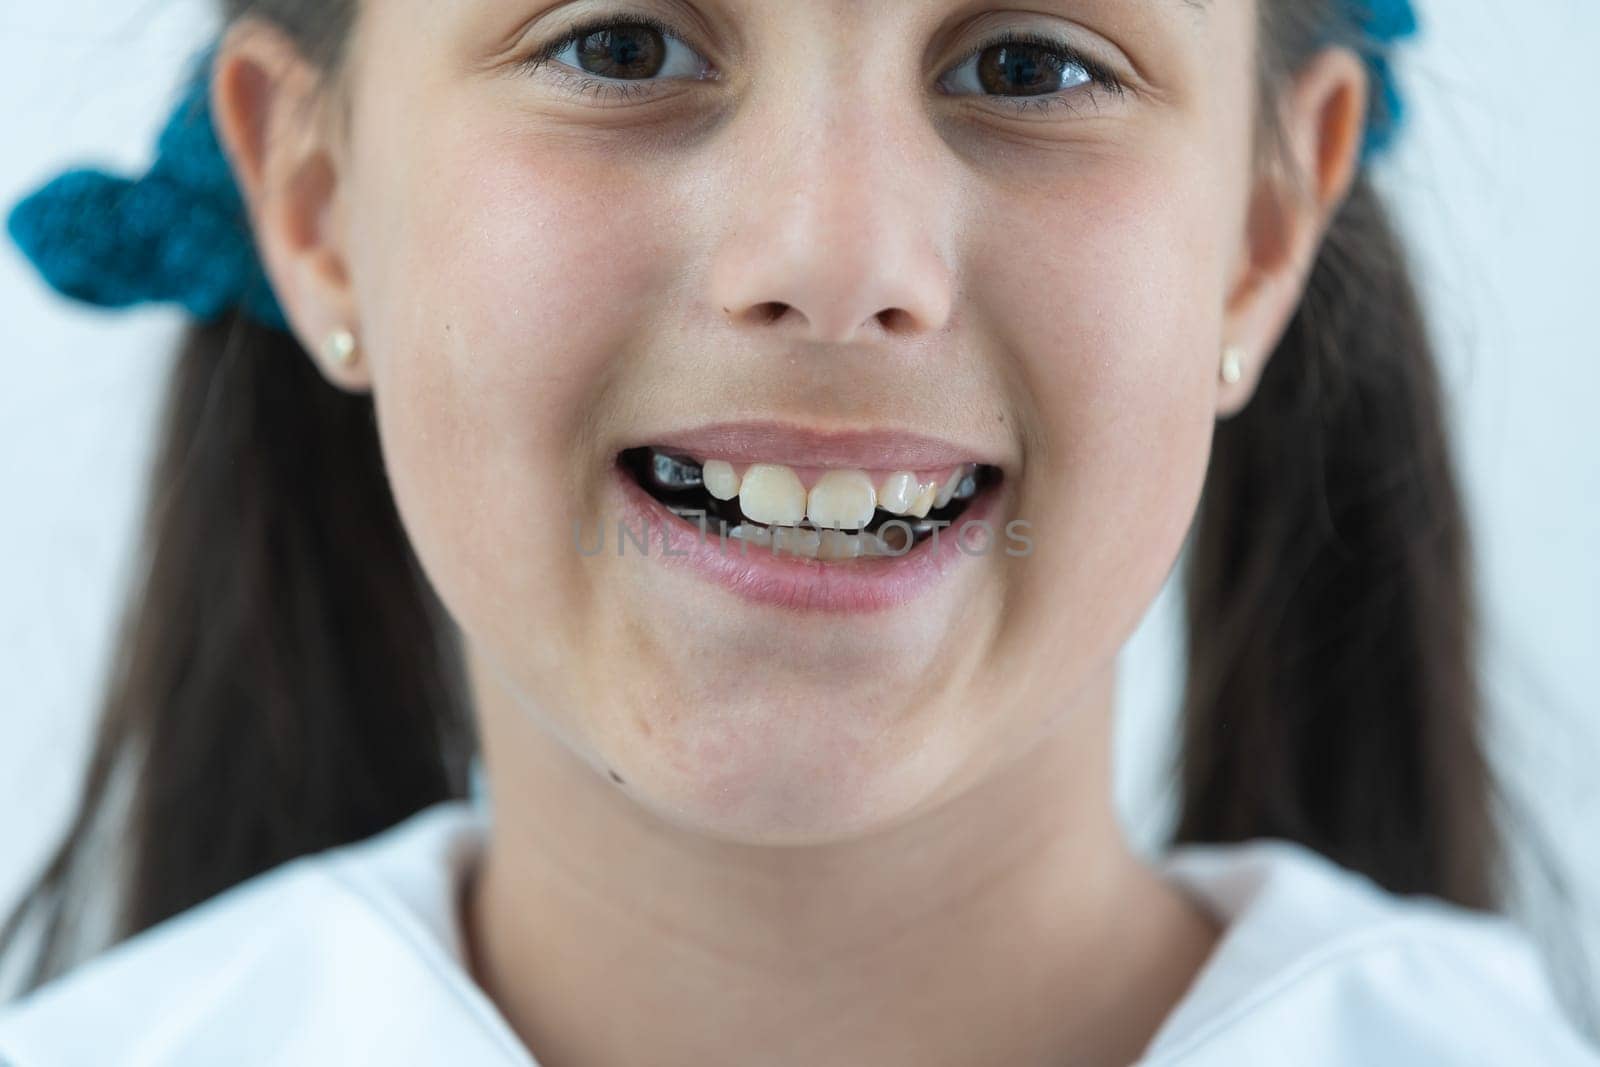 a little girl with a shifted dentition demonstrates her teeth by Andelov13